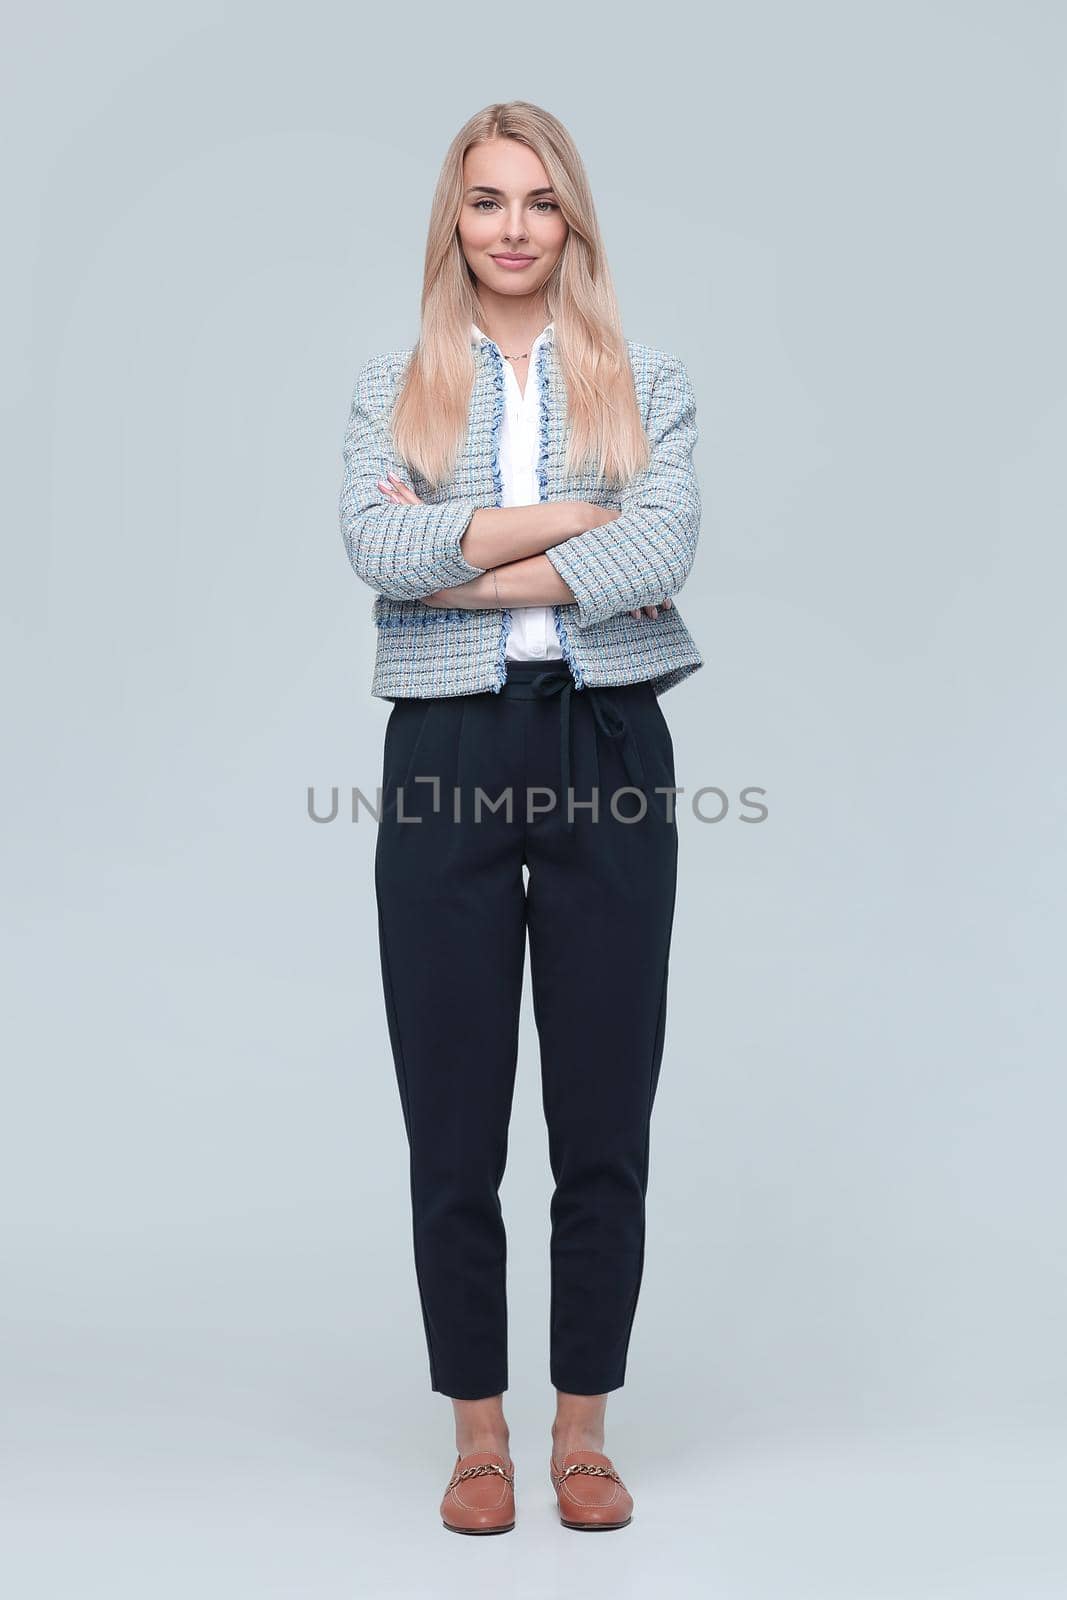 in full growth. confident young business woman. isolated on light background